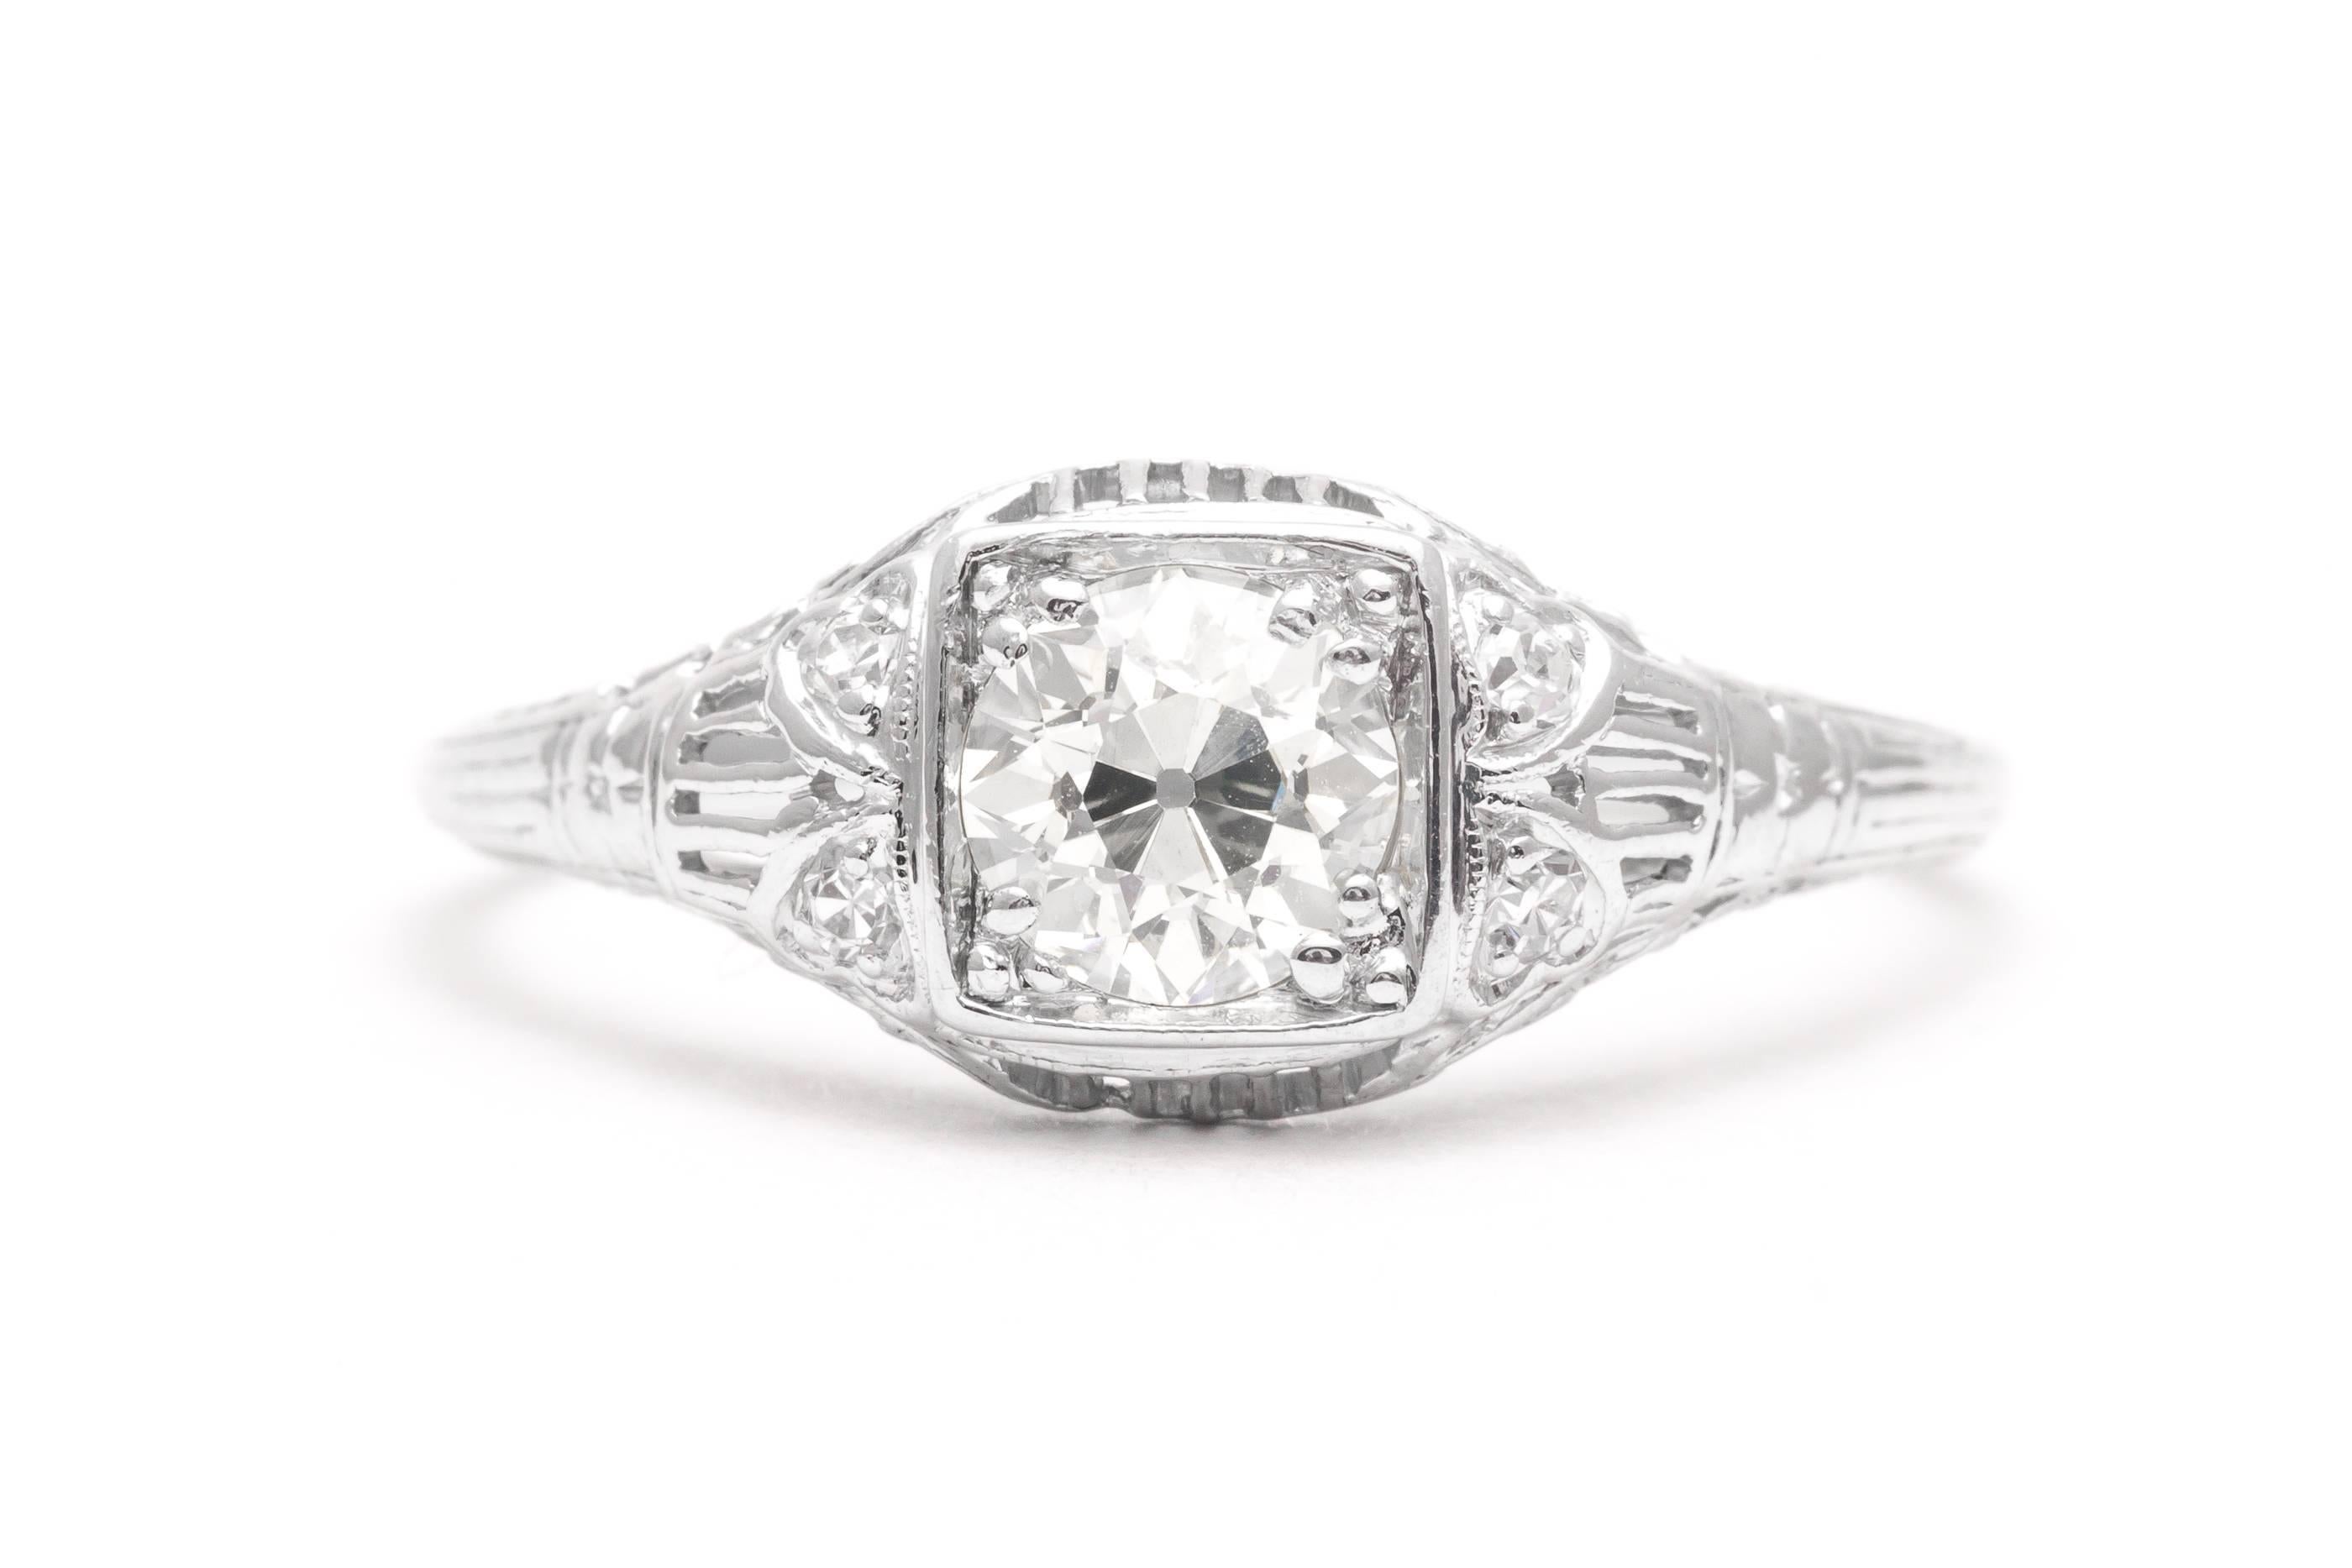 A beautiful art deco period diamond engagement ring in luxurious platinum. Centered by a high quality 0.90 carat old European cut diamond this ring features beautiful hand pierced filigree work along with sparkling accenting diamonds.

Grading as